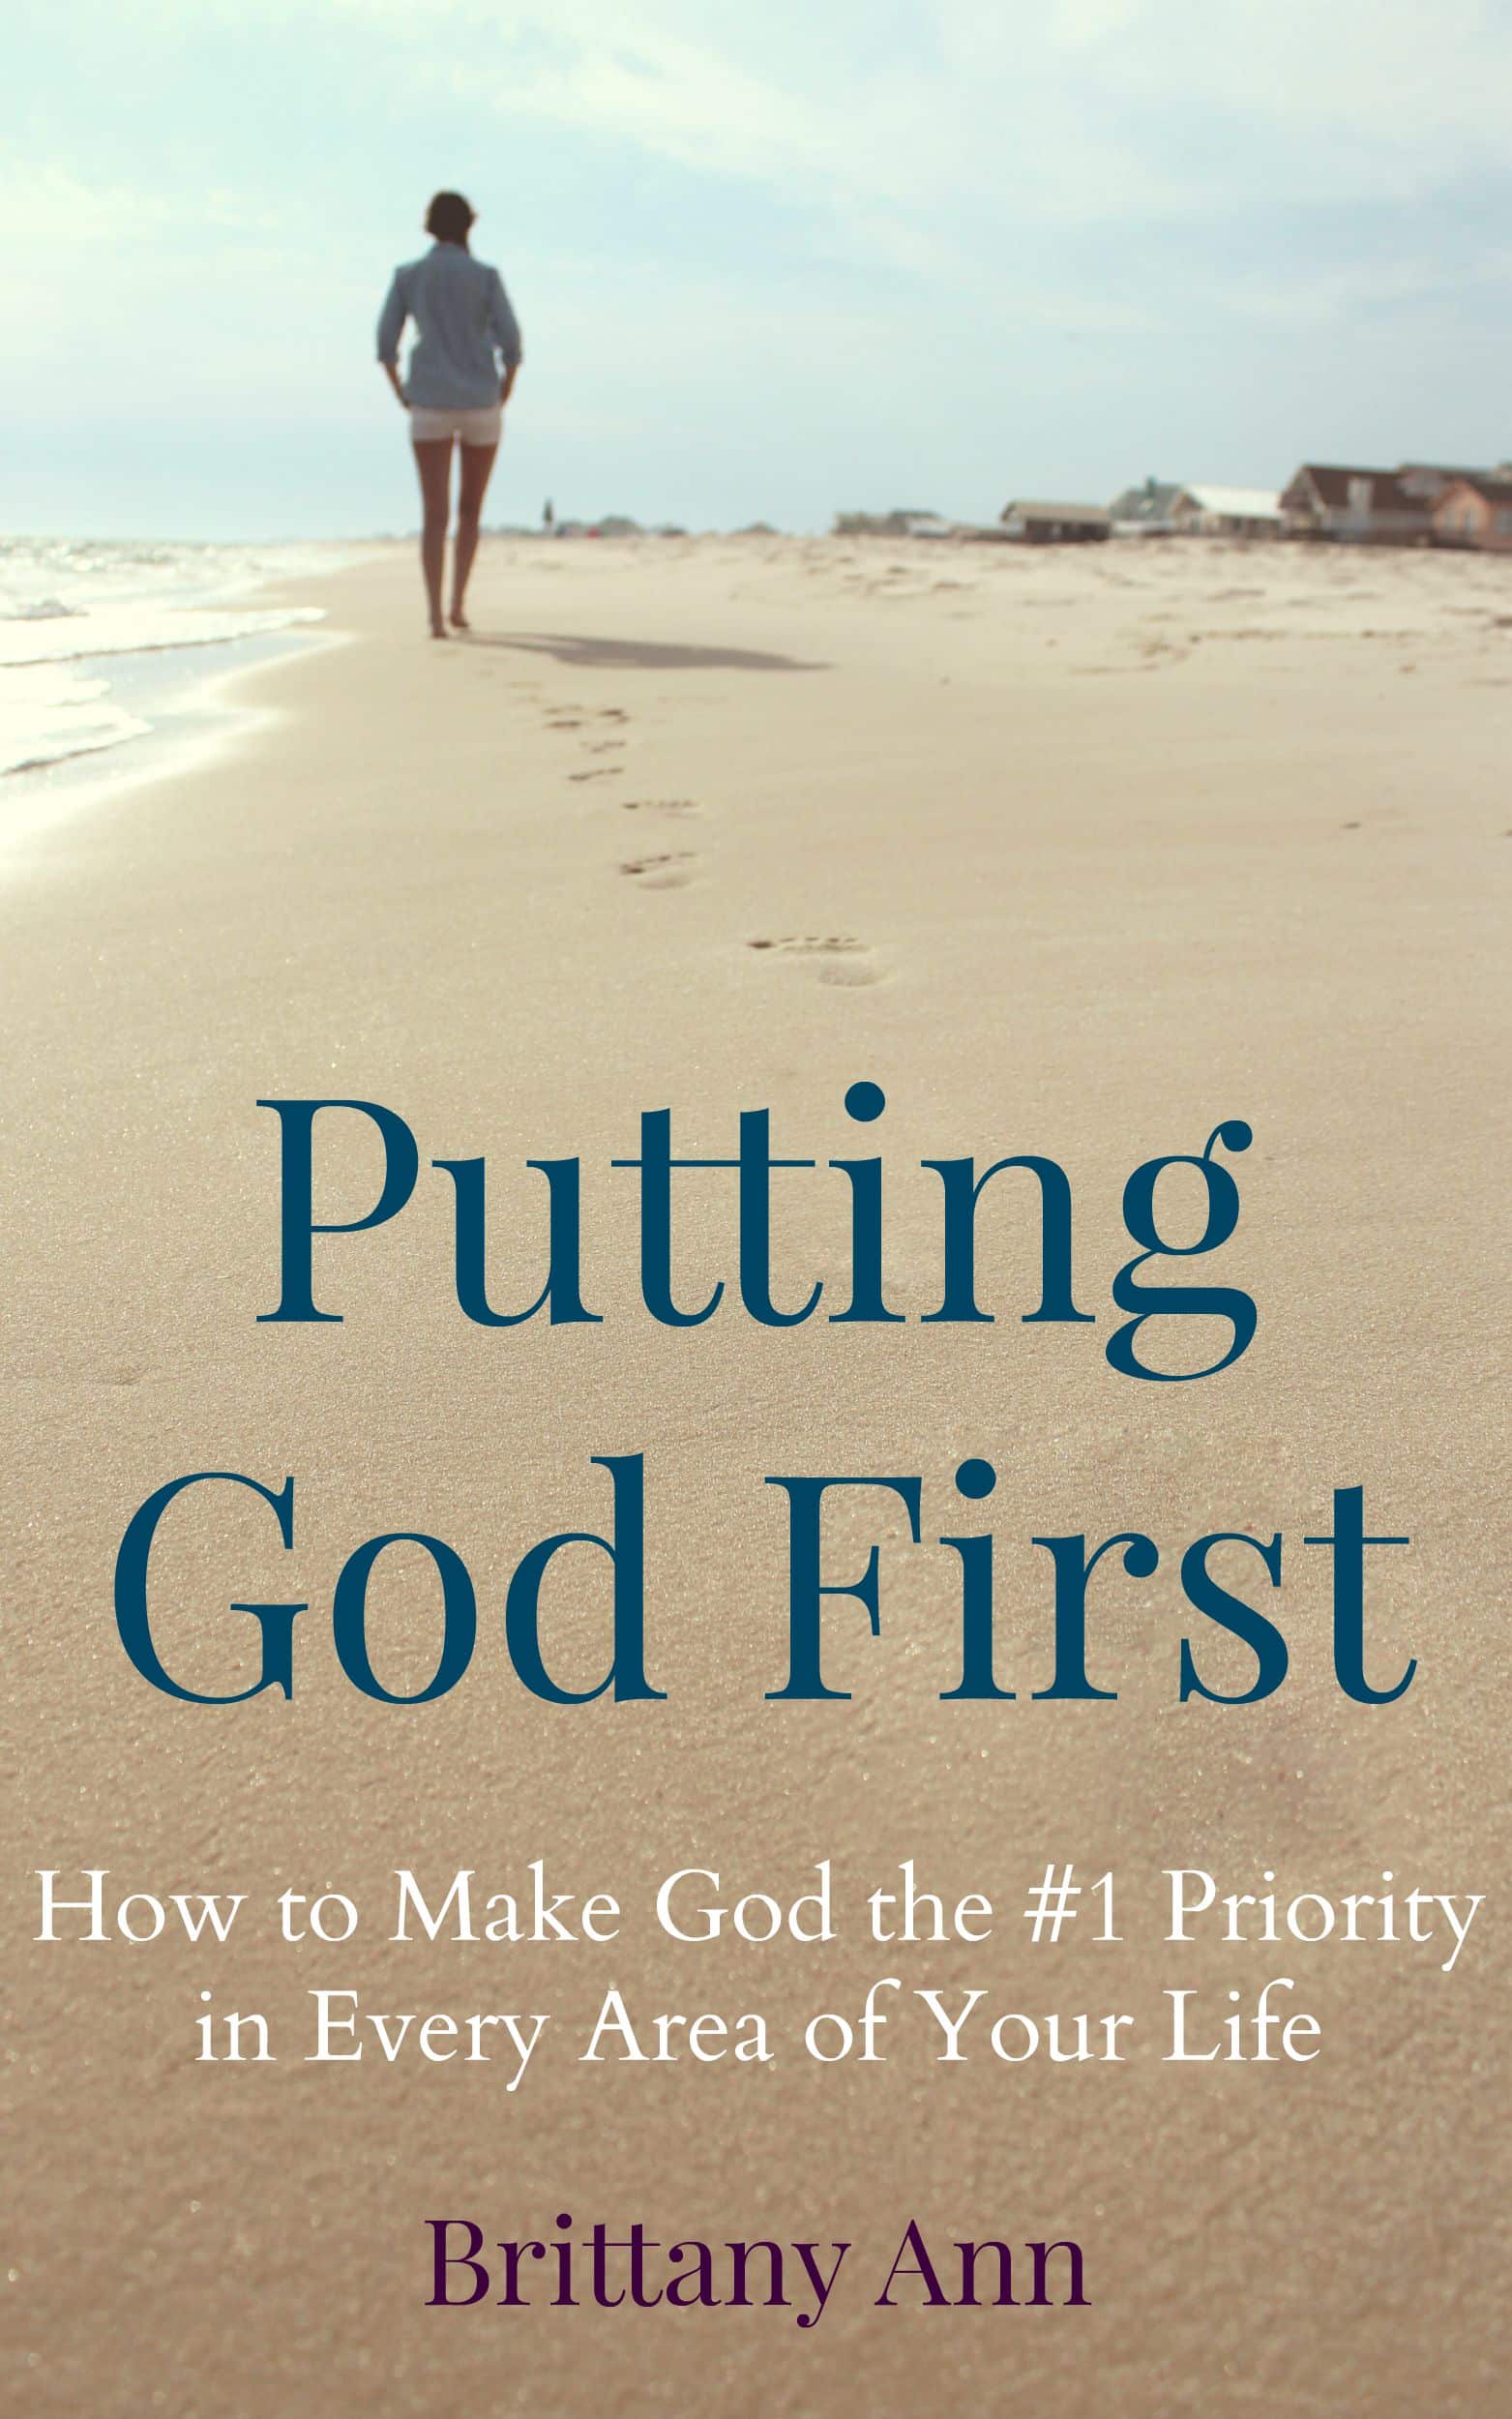 Do you ever struggle to make God the #1 priority in your life? This will help!!